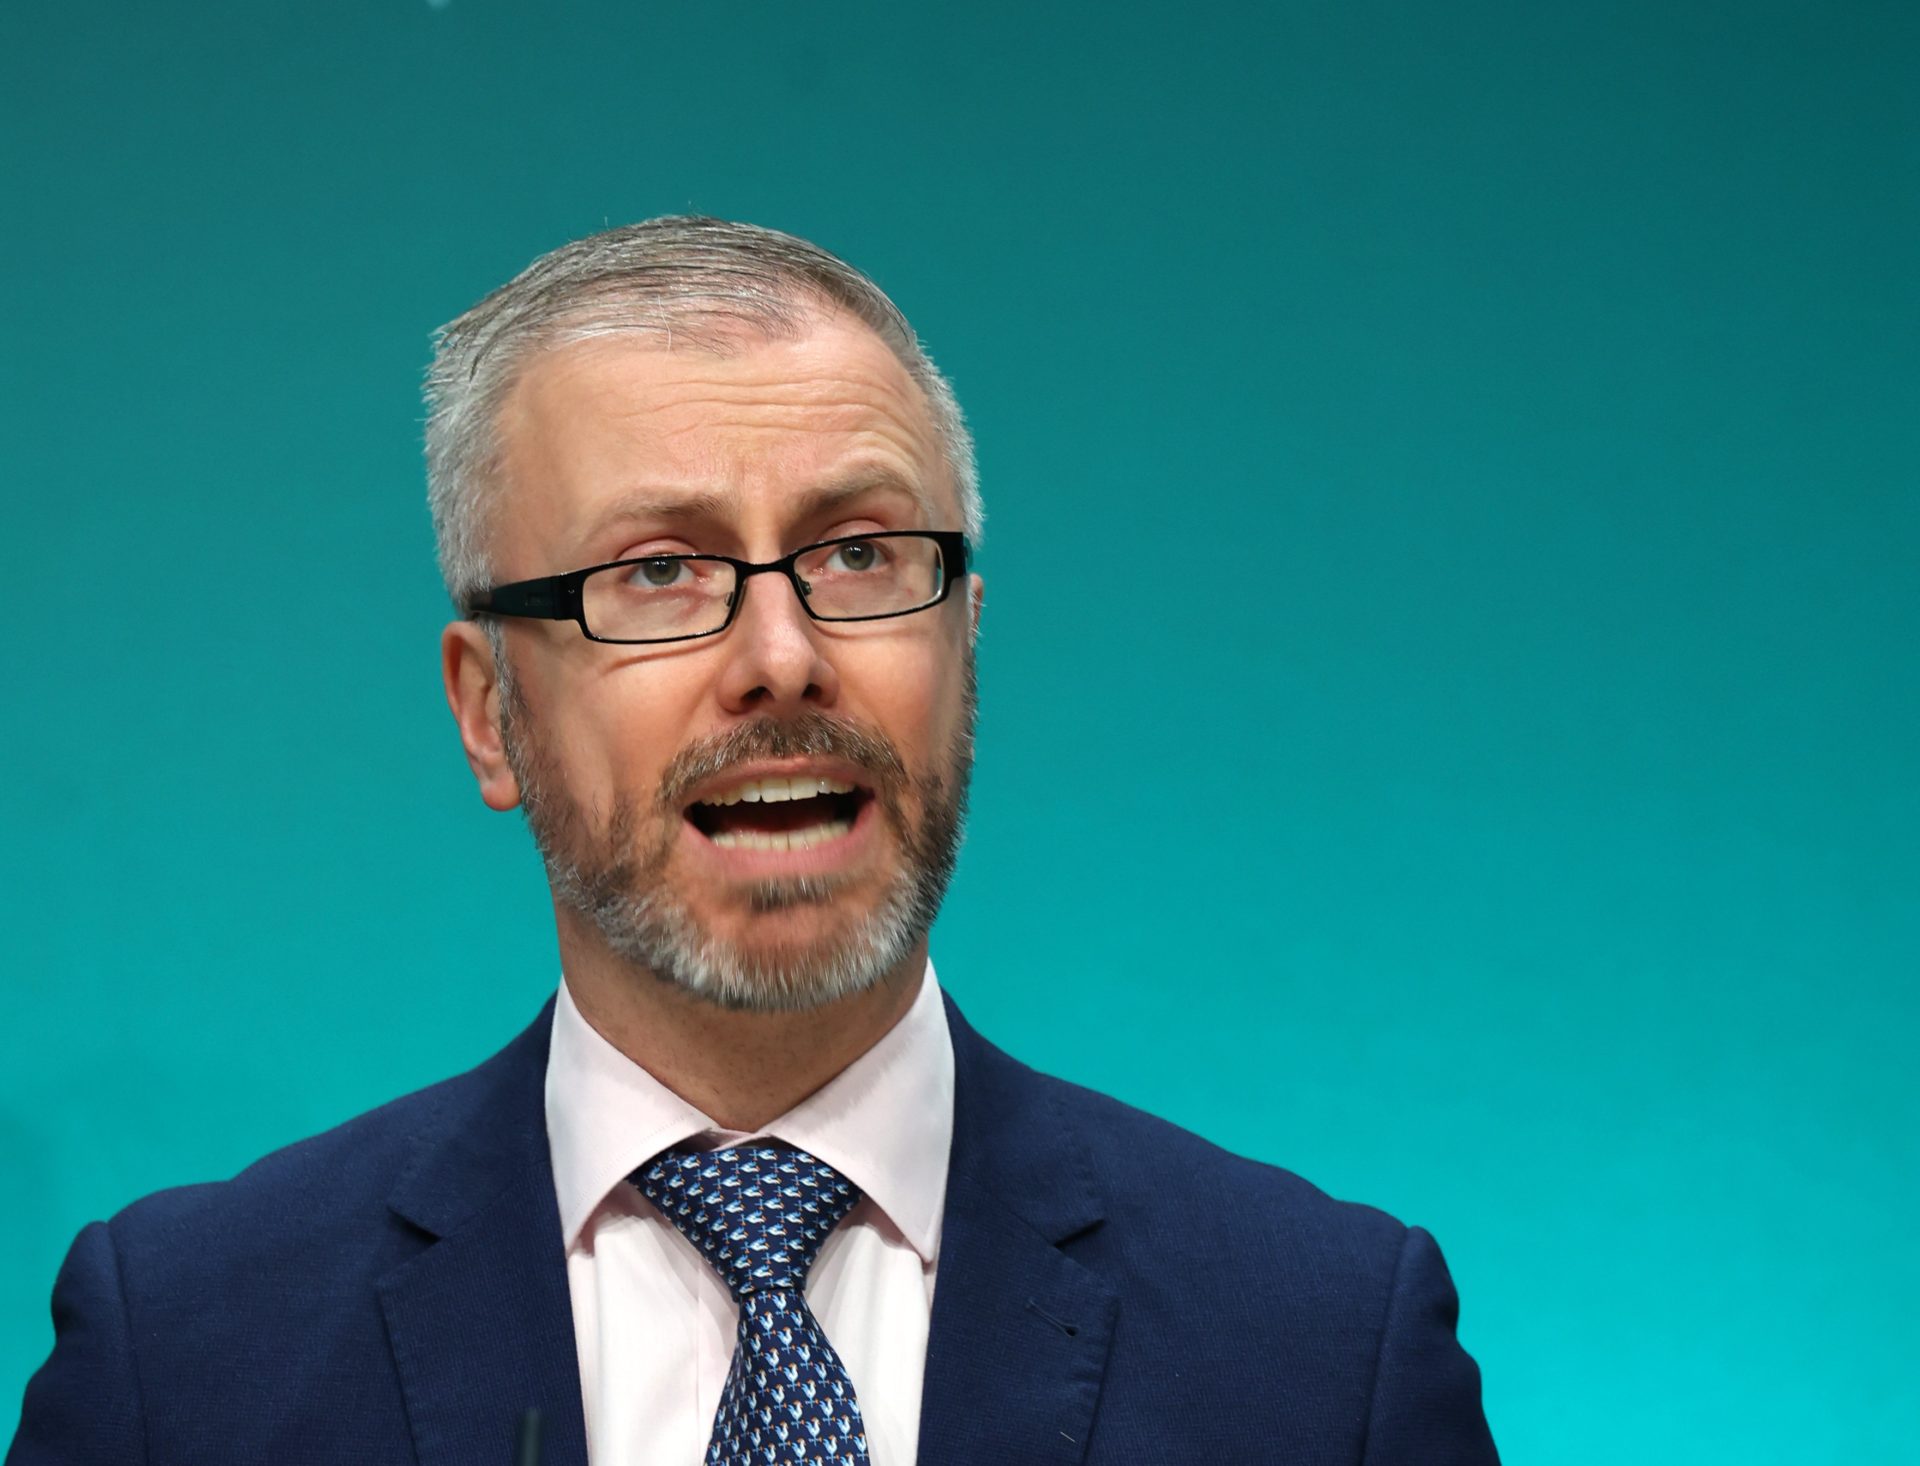 Minister for Children, Equality, Disability, Integration and Youth Roderic O'Gorman in the Government Press Centre in September 2022.